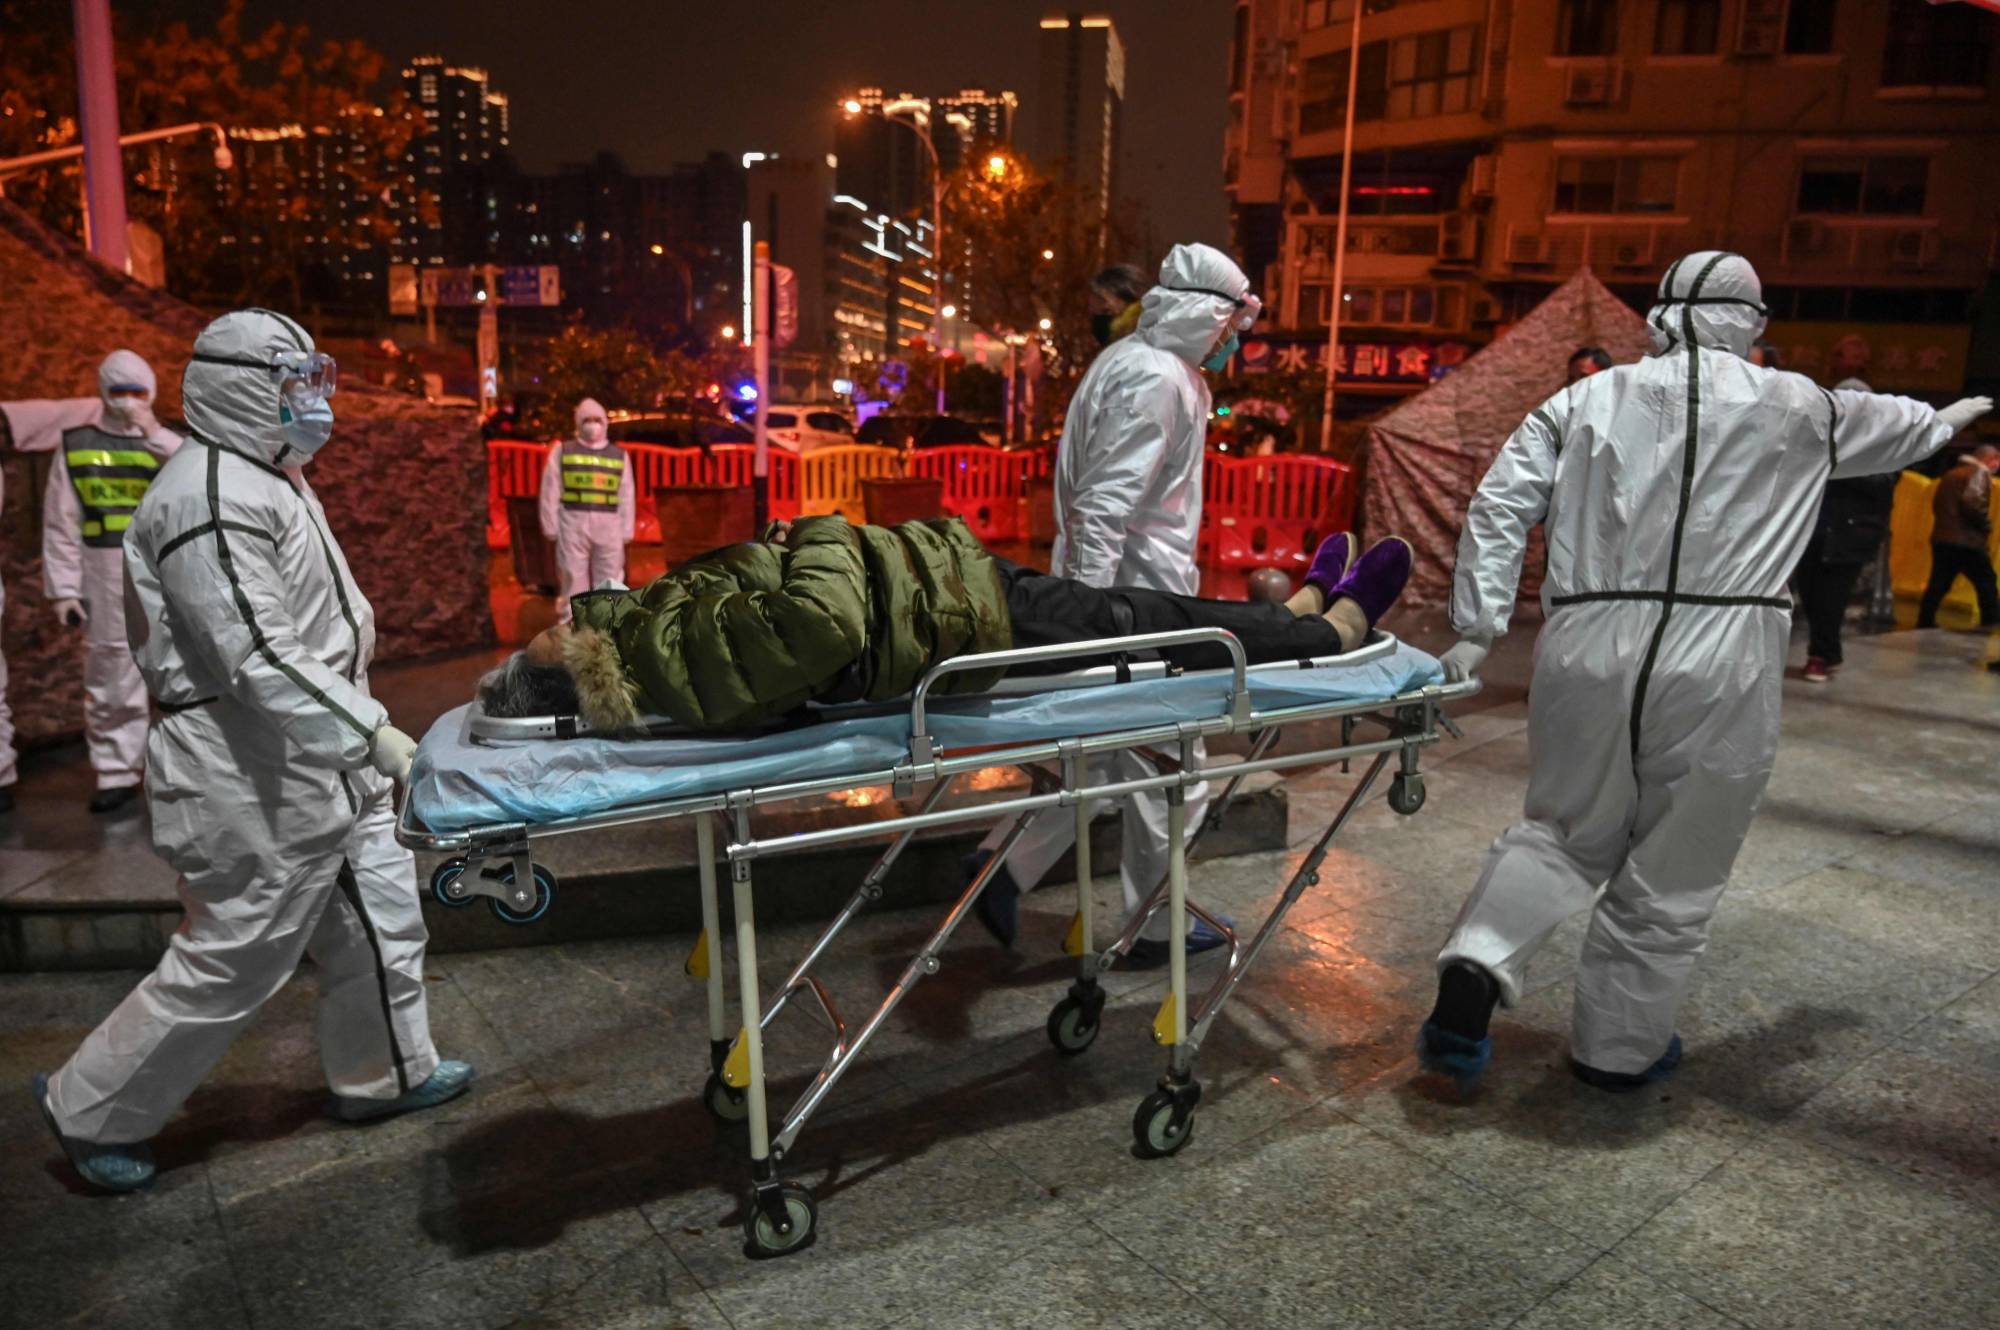 A patient arrives at the Wuhan Red Cross Hospital on Jan. 25, during the early stages of the outbreak of COVID-19.  | AFP-JIJI